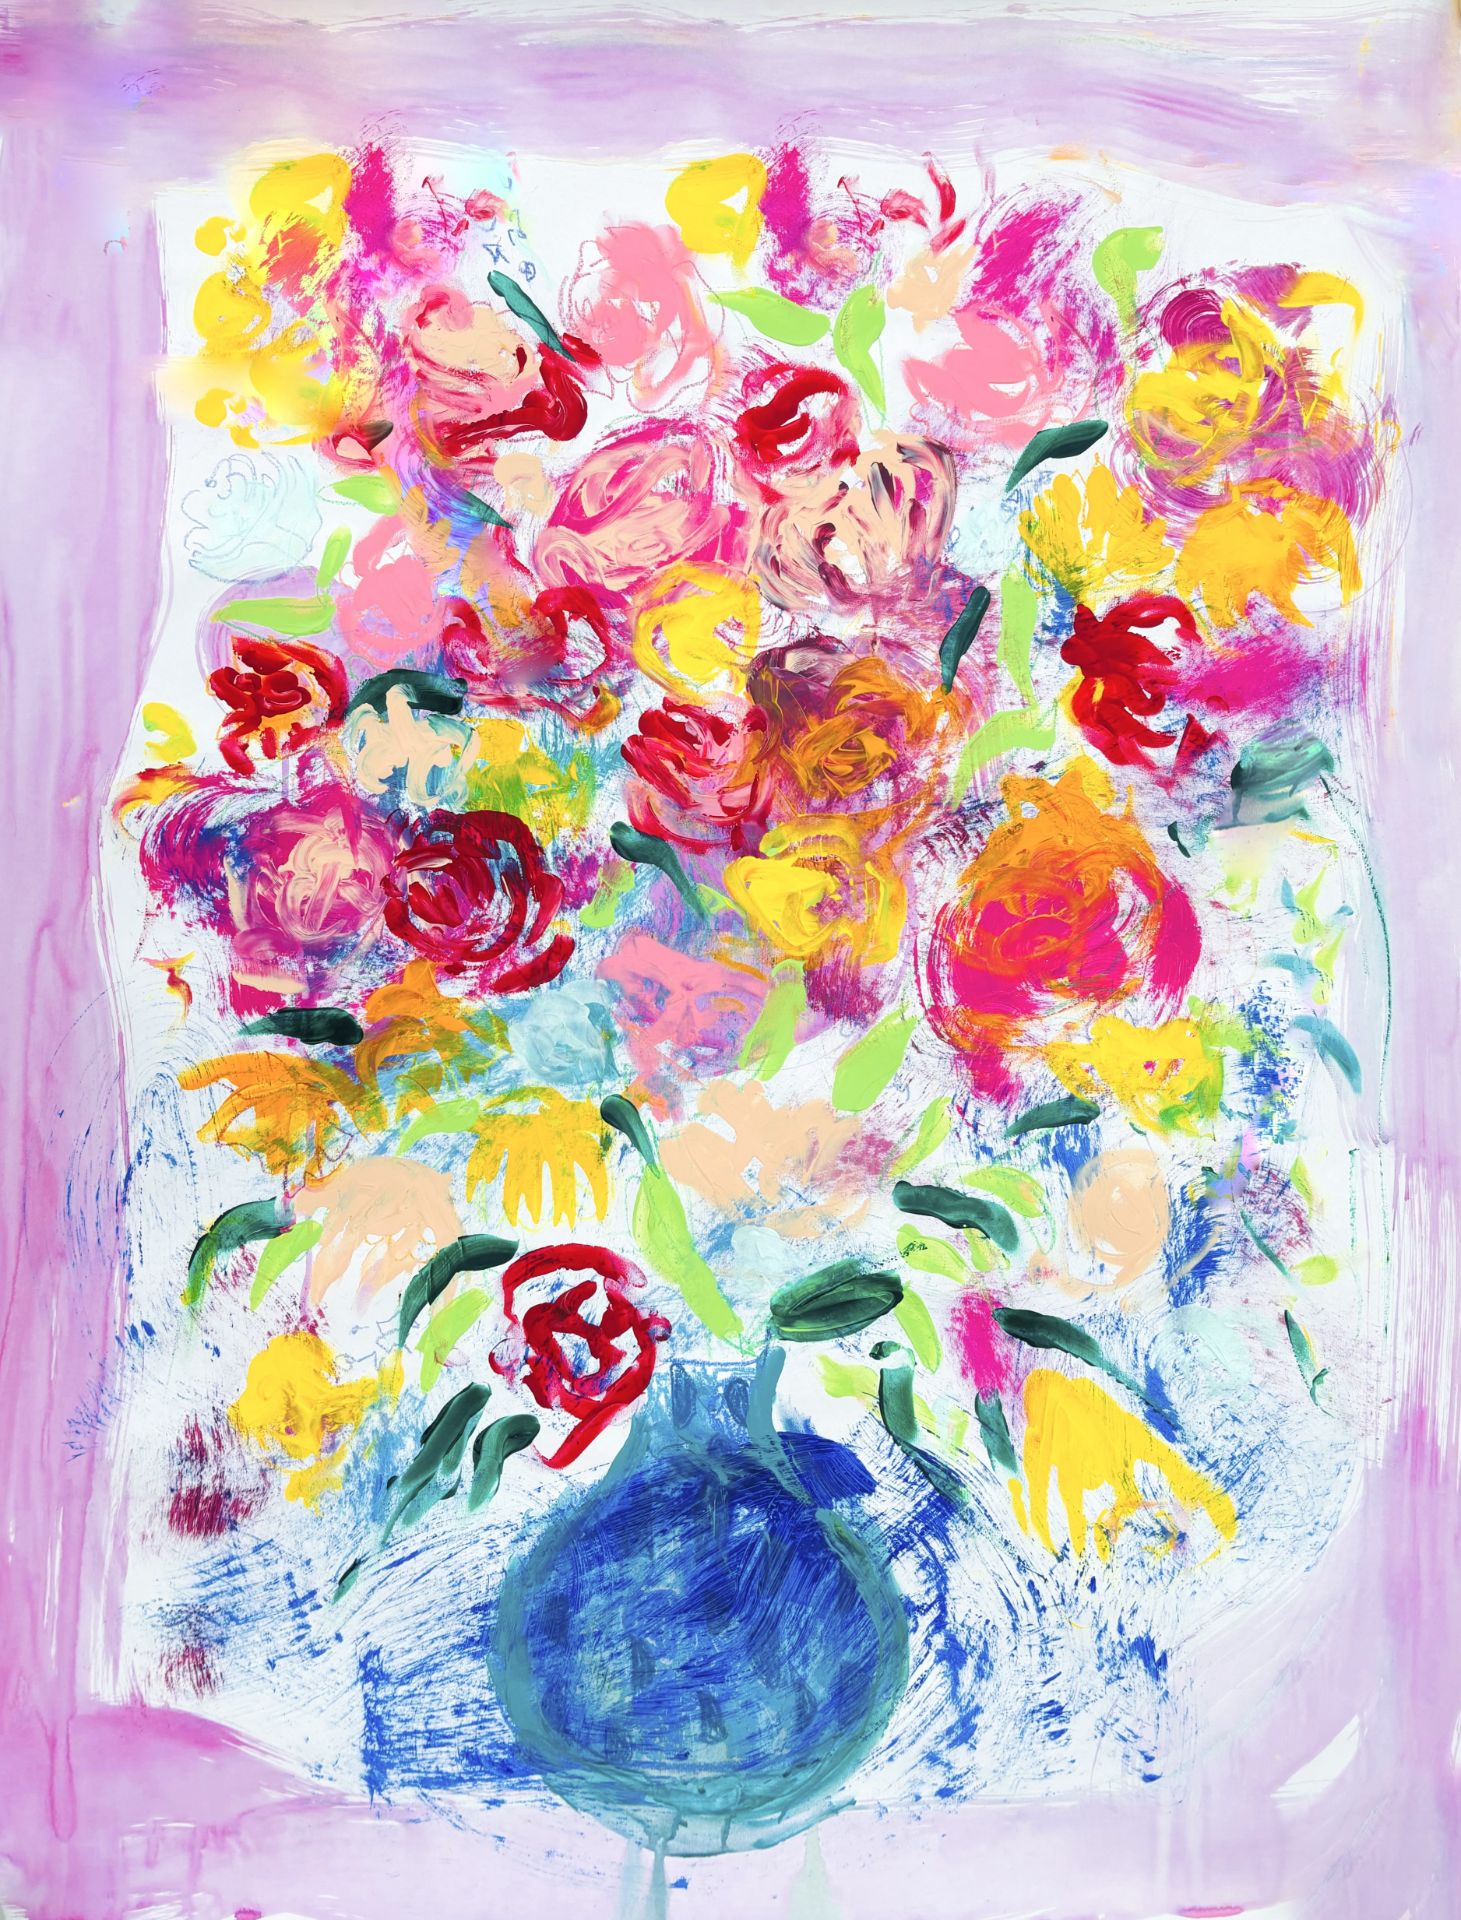 Laughing Roses by Beatrice Dina Acrylics, oil and pastels on paper 2022